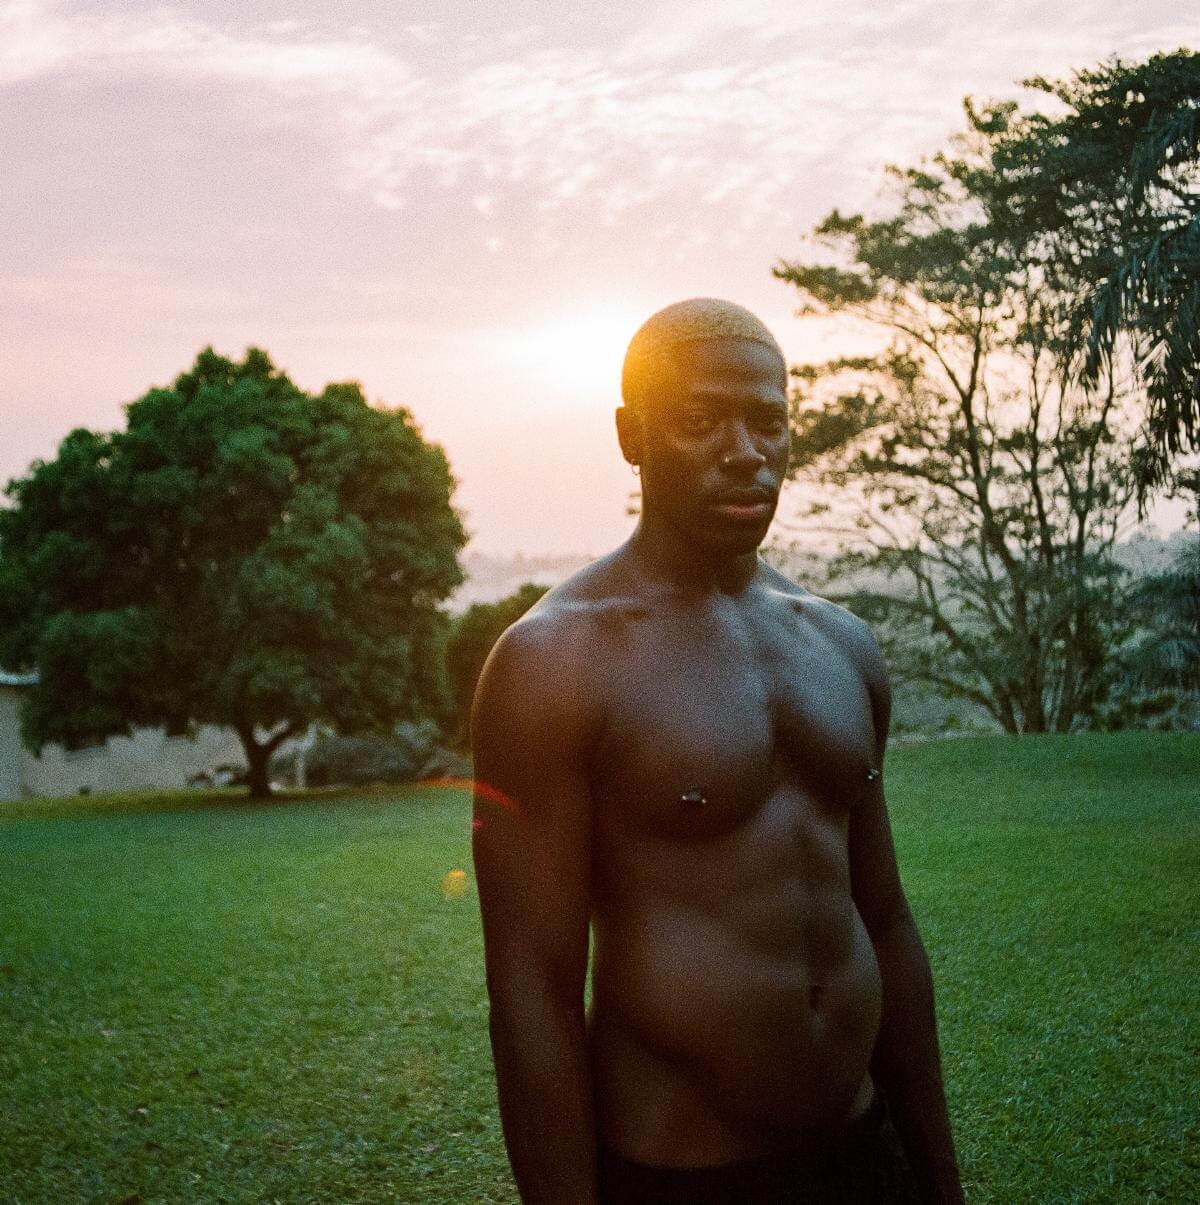 Multi-artist Moses Sumney, releases new single "Get It B4," his first solo original recording since 2020's double album græ